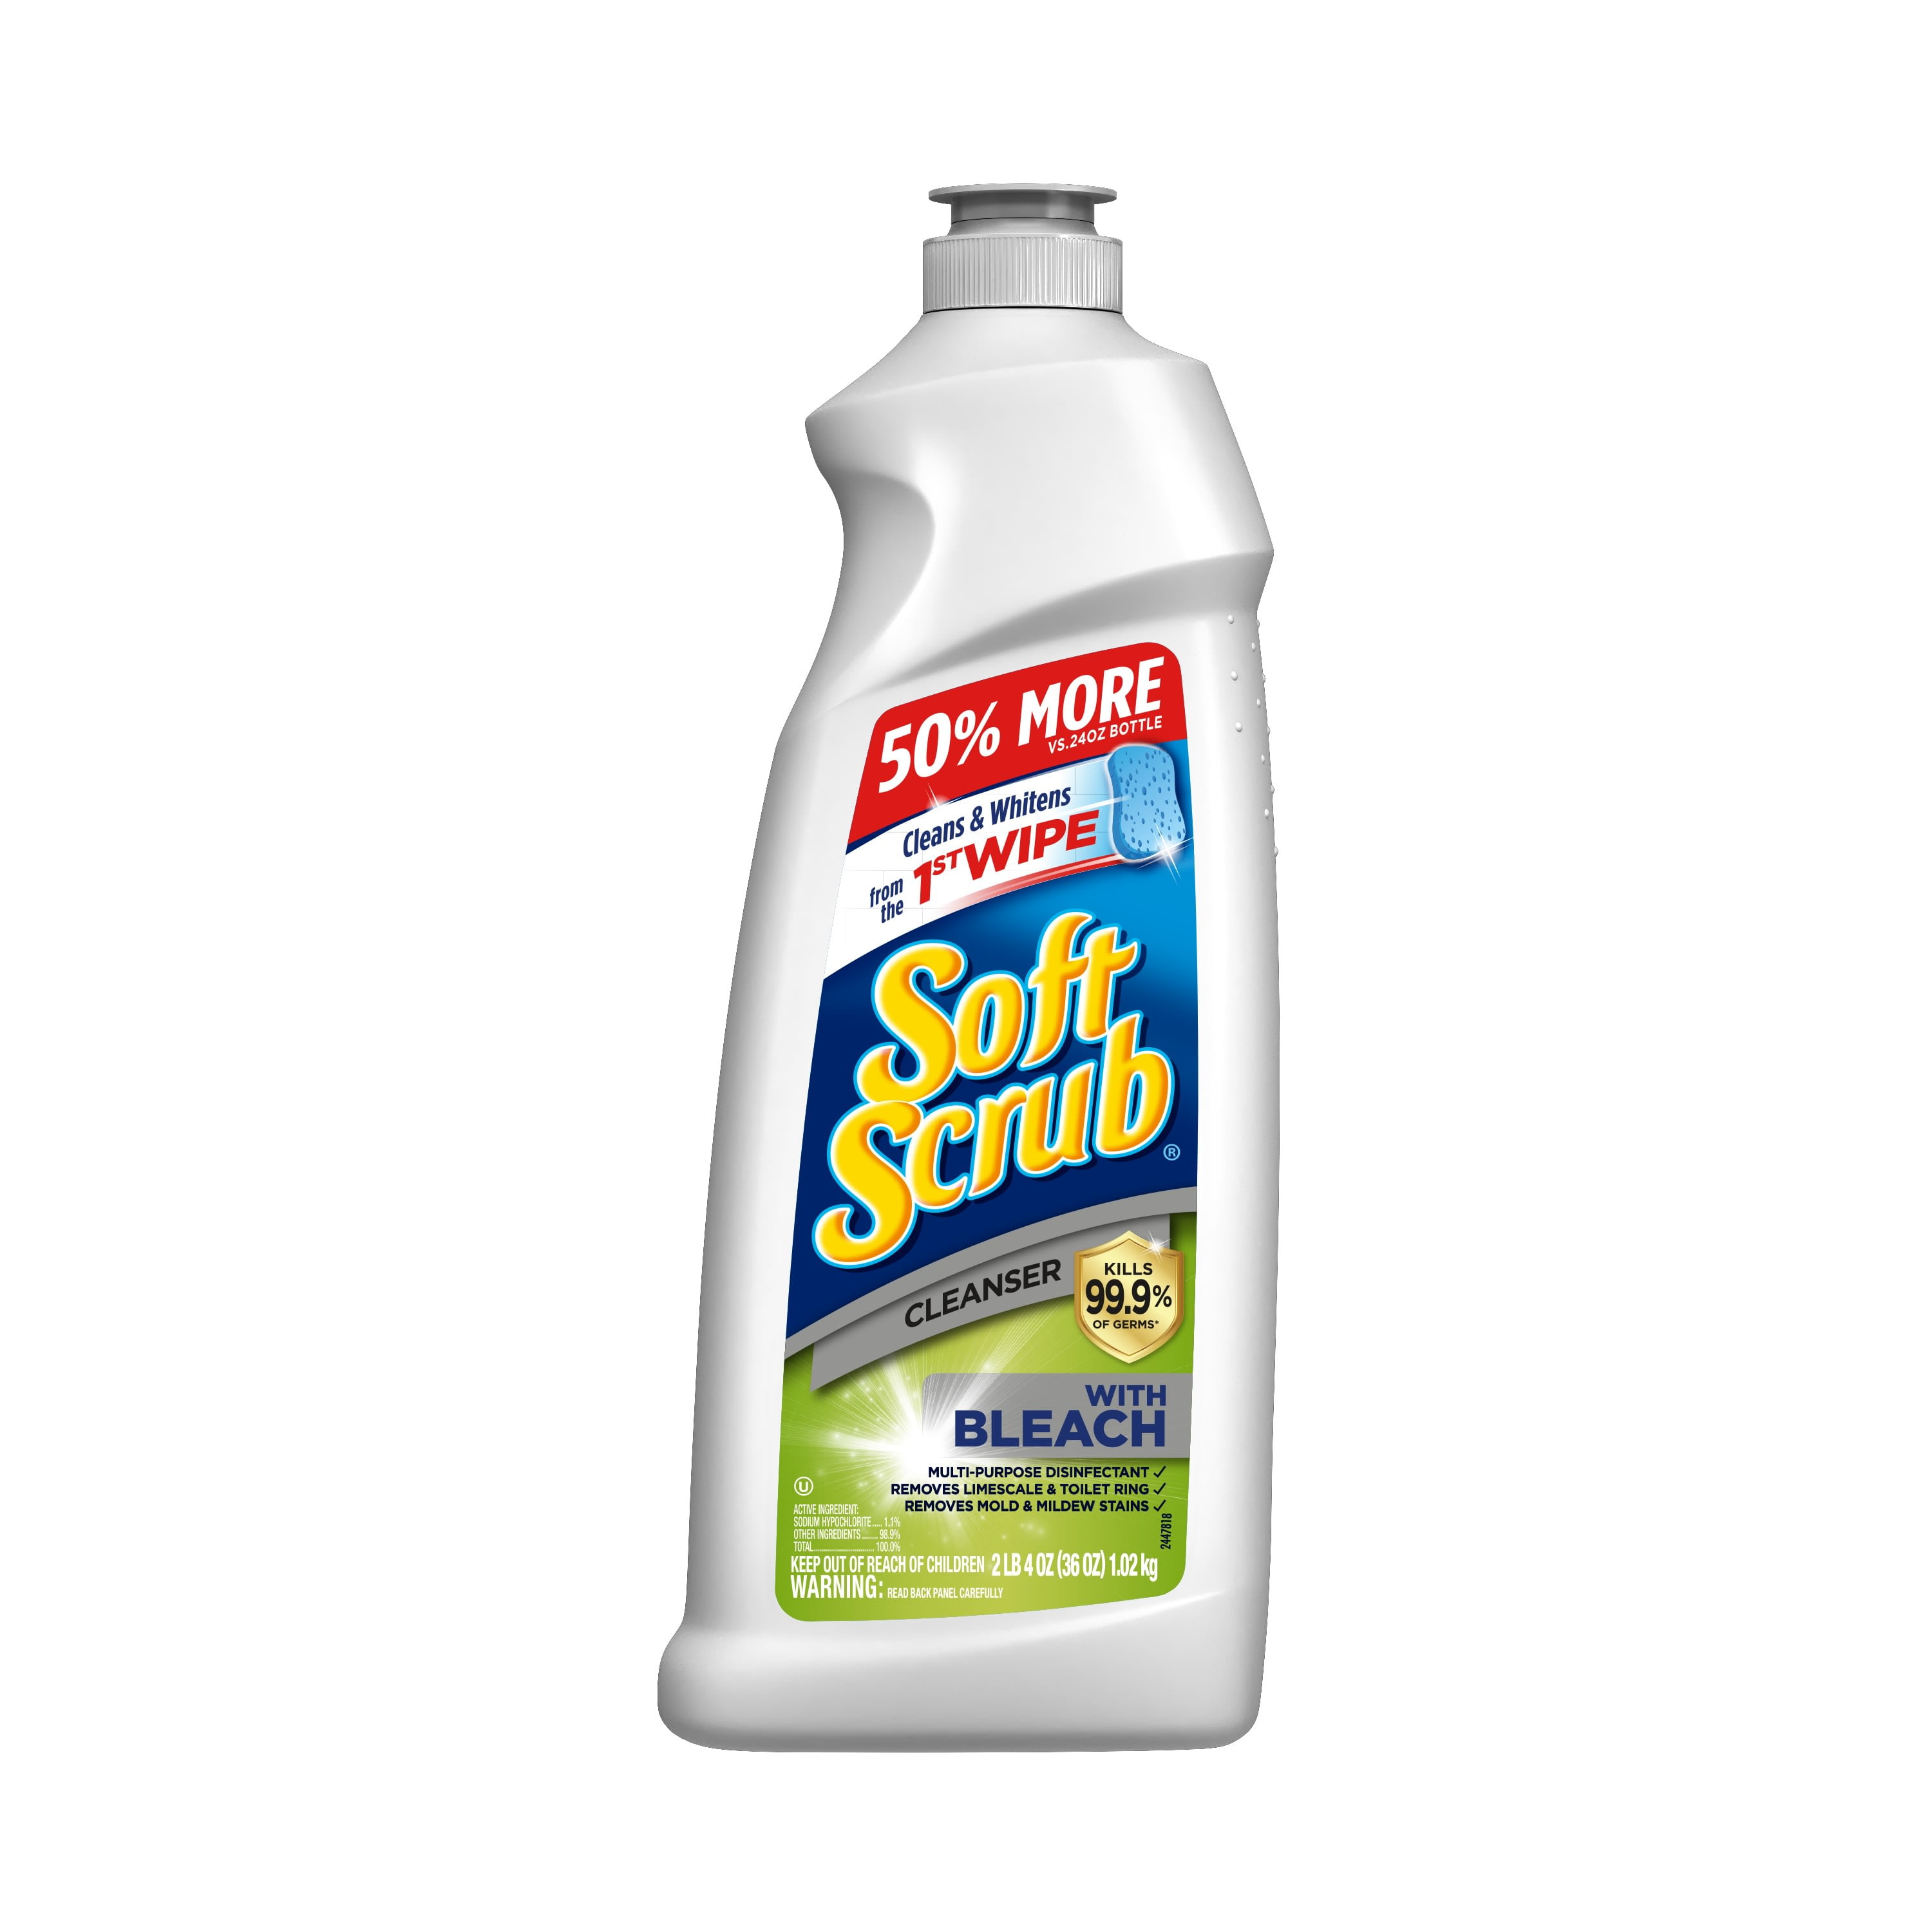 Soft Scrub Antibacterial Multi-Purpose Cleanser with Bleach Surface Cleaner, 36 Fluid Ounces